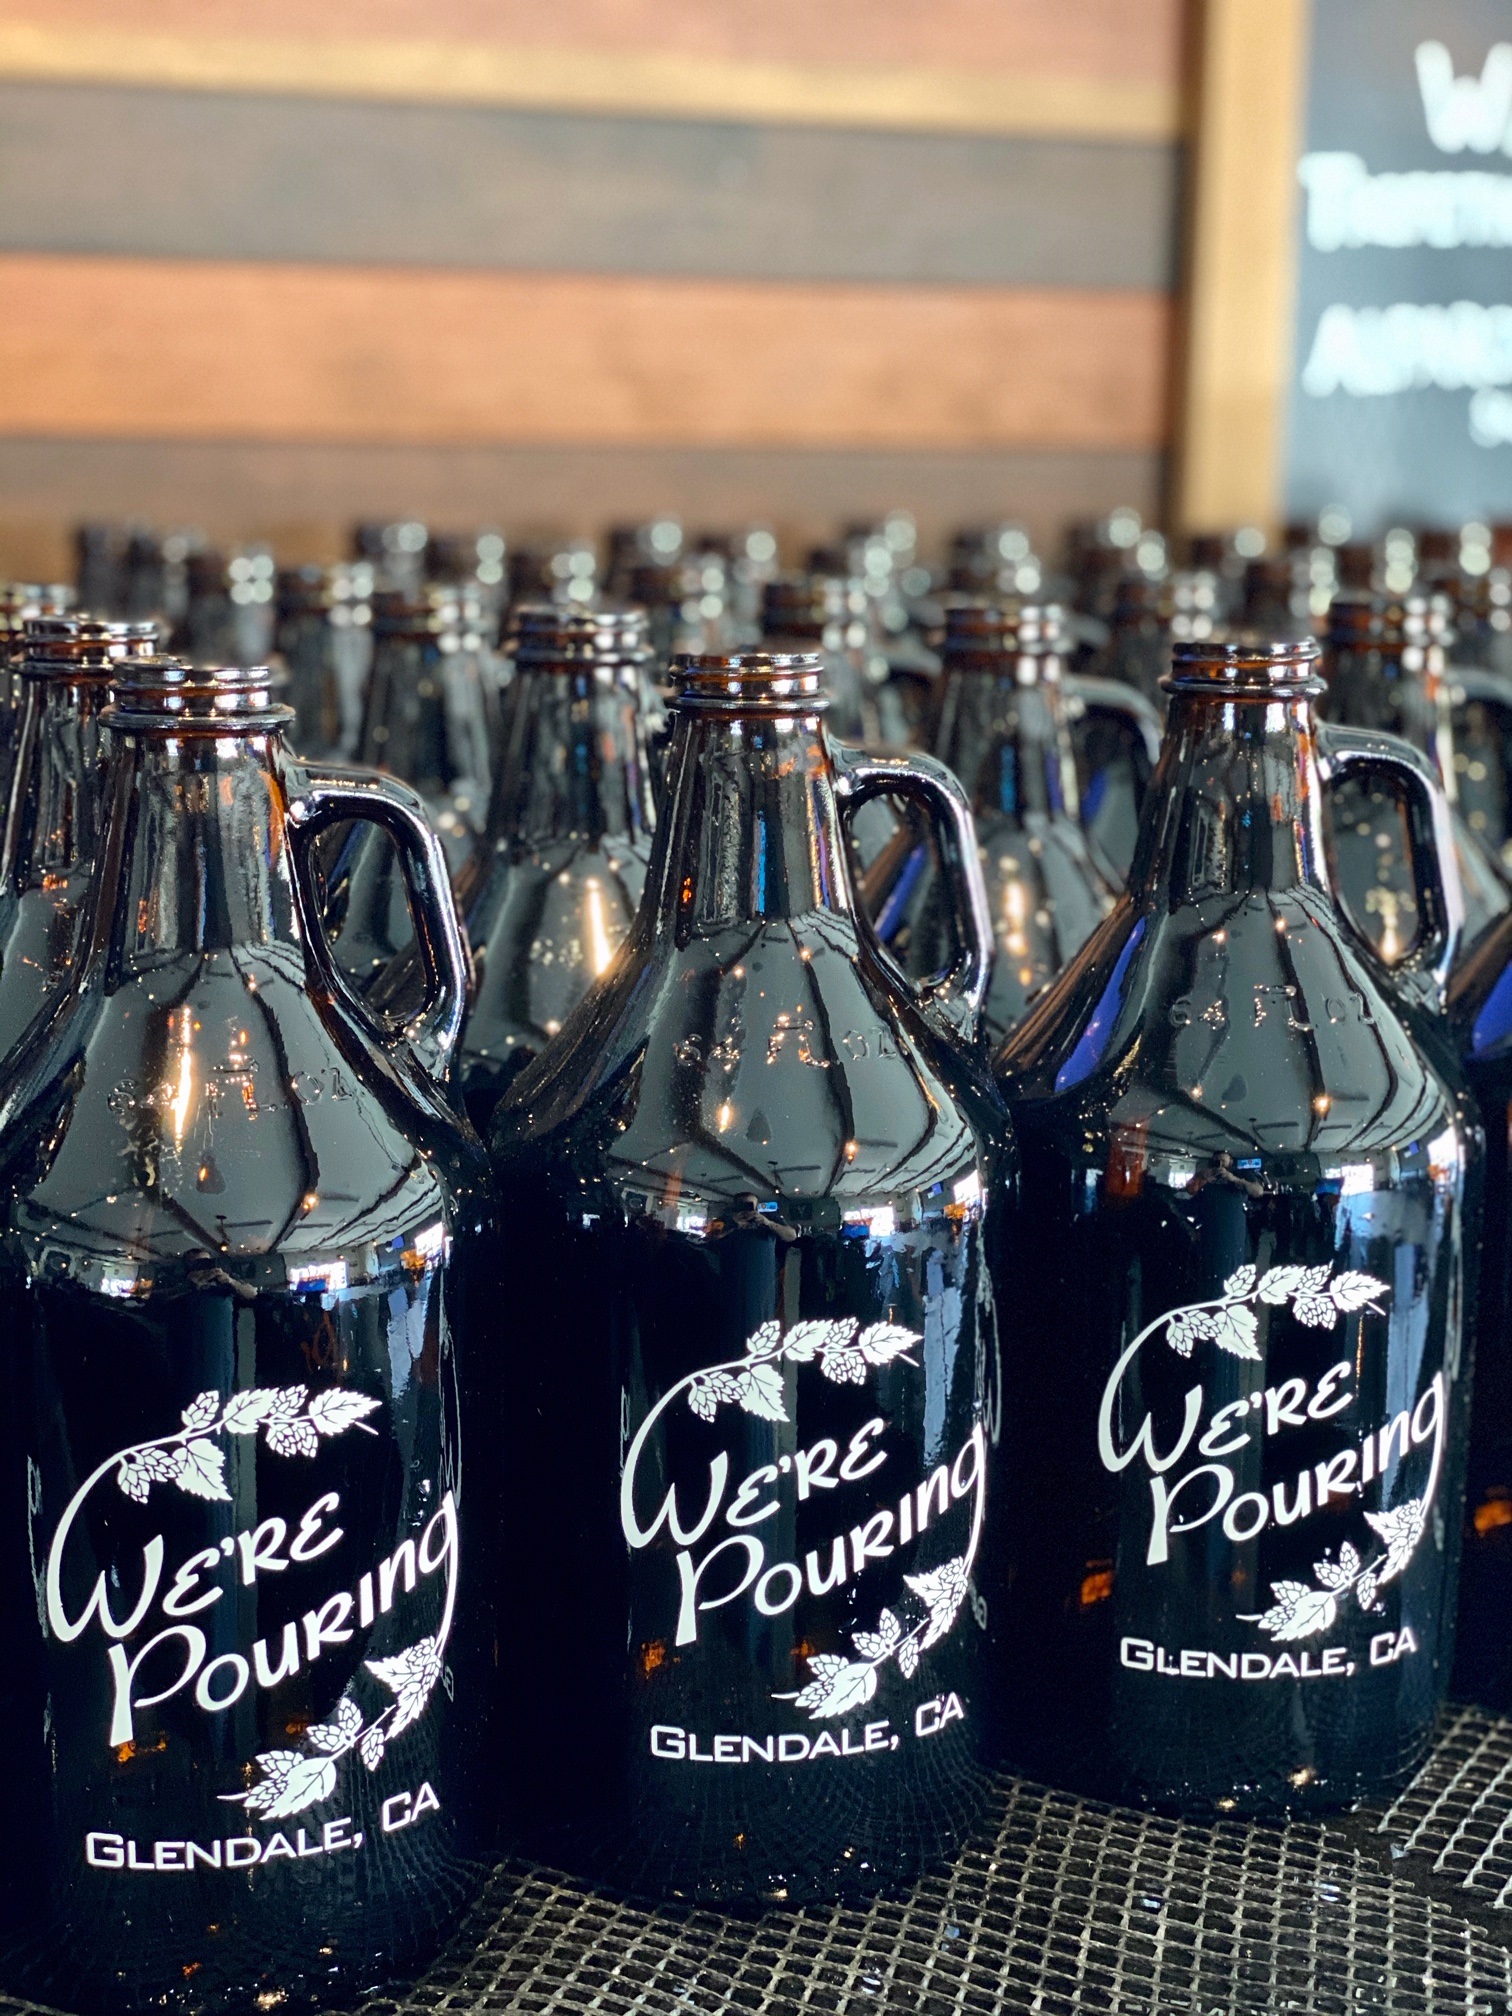 Craft-Beer-Growlers-To-Go-Were-Pouring-Restaurant-Glendale